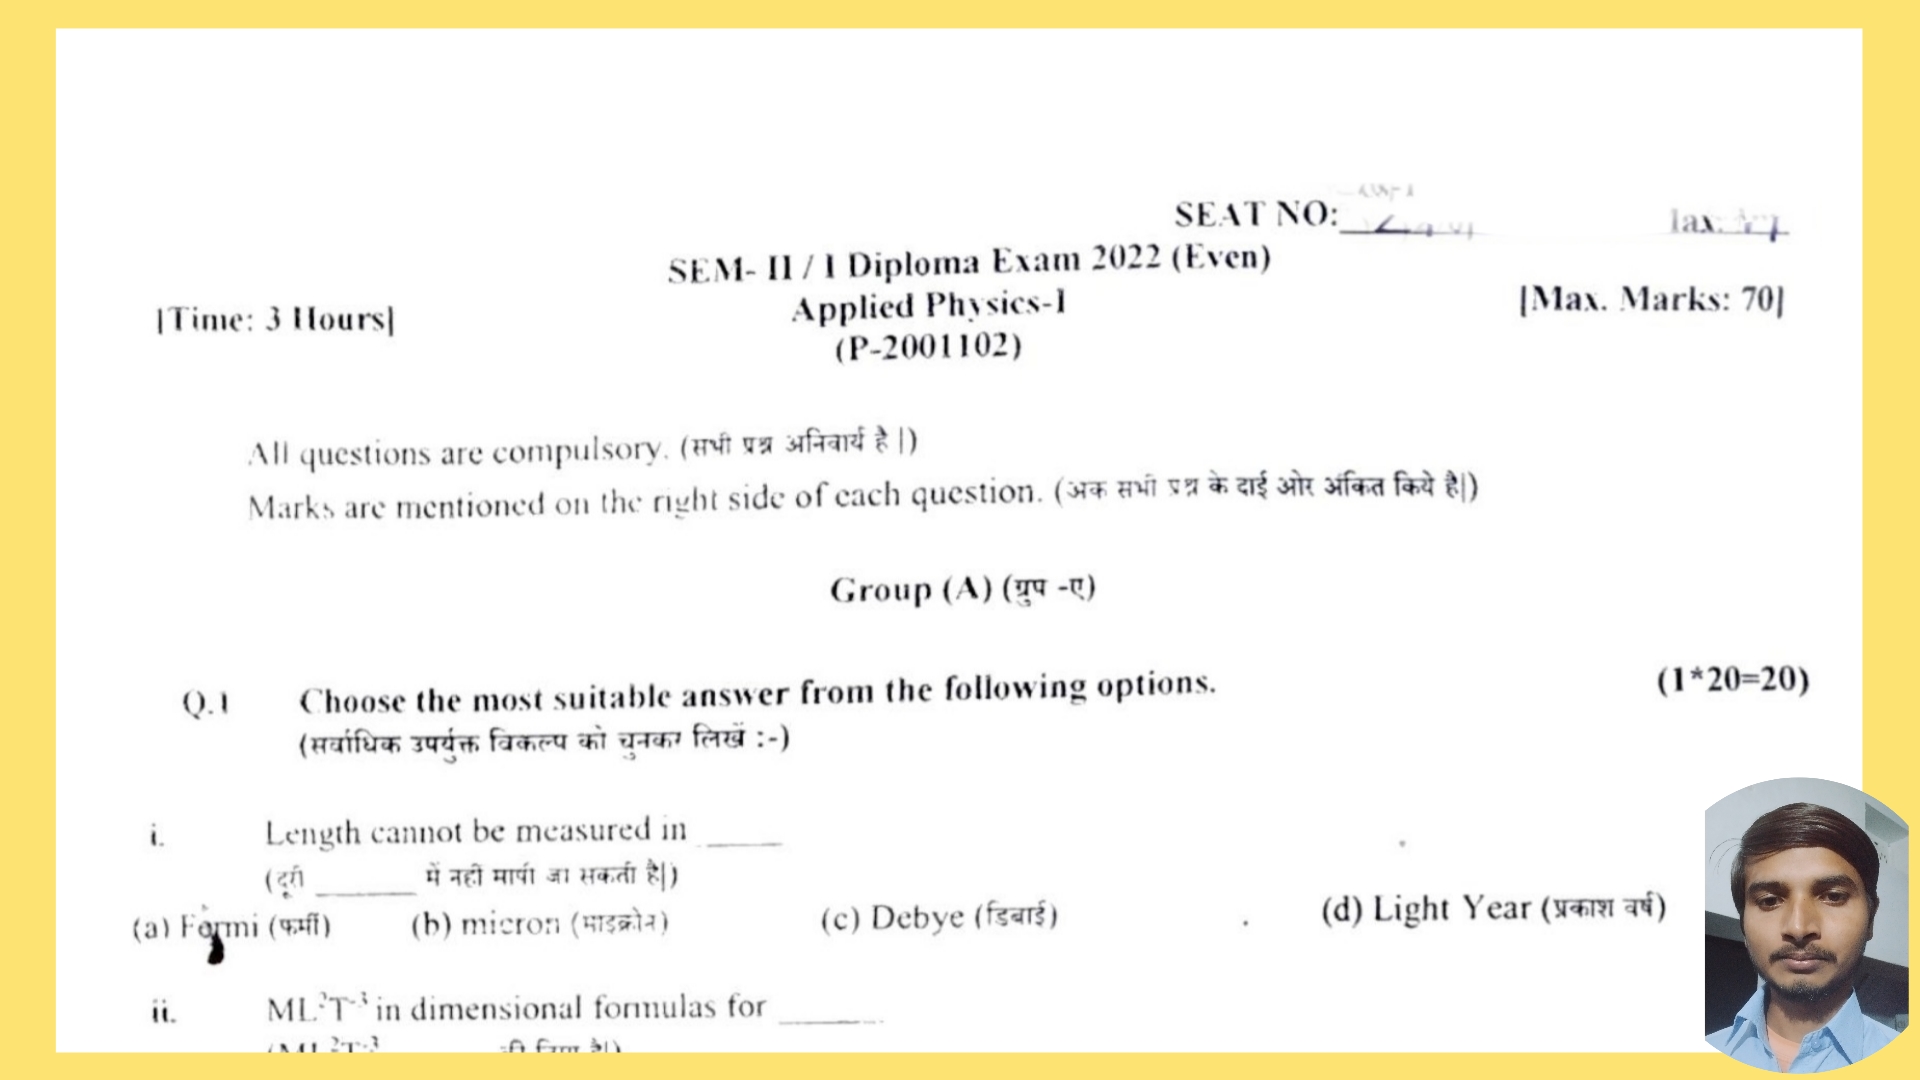 Applied Physics I question paper 2022 (Even) exam held in November 2022